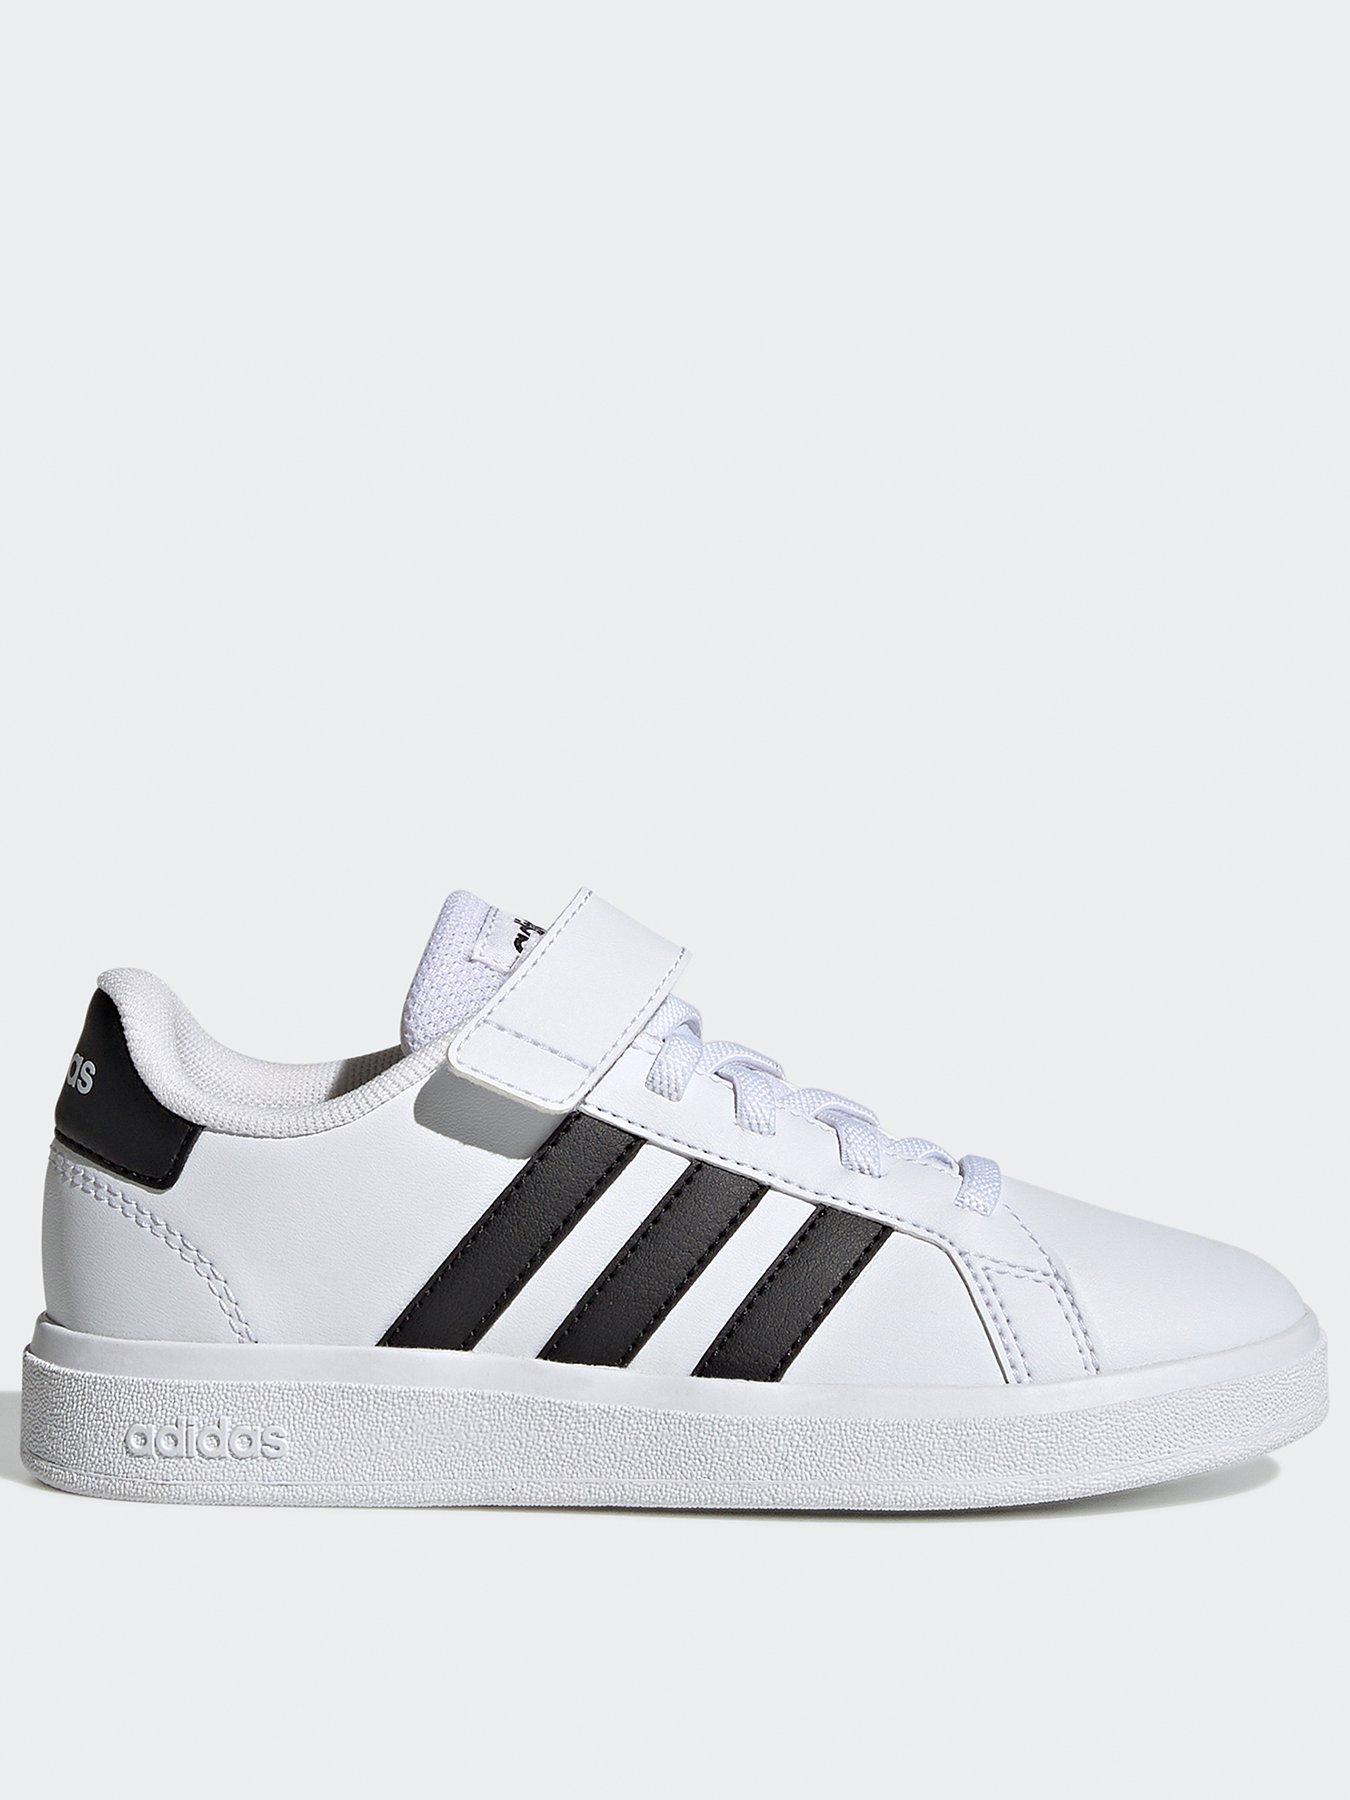 adidas Sportswear Kids Unisex Grand Court 2.0 Trainers - White/Black, White/Black, Size 10 Younger